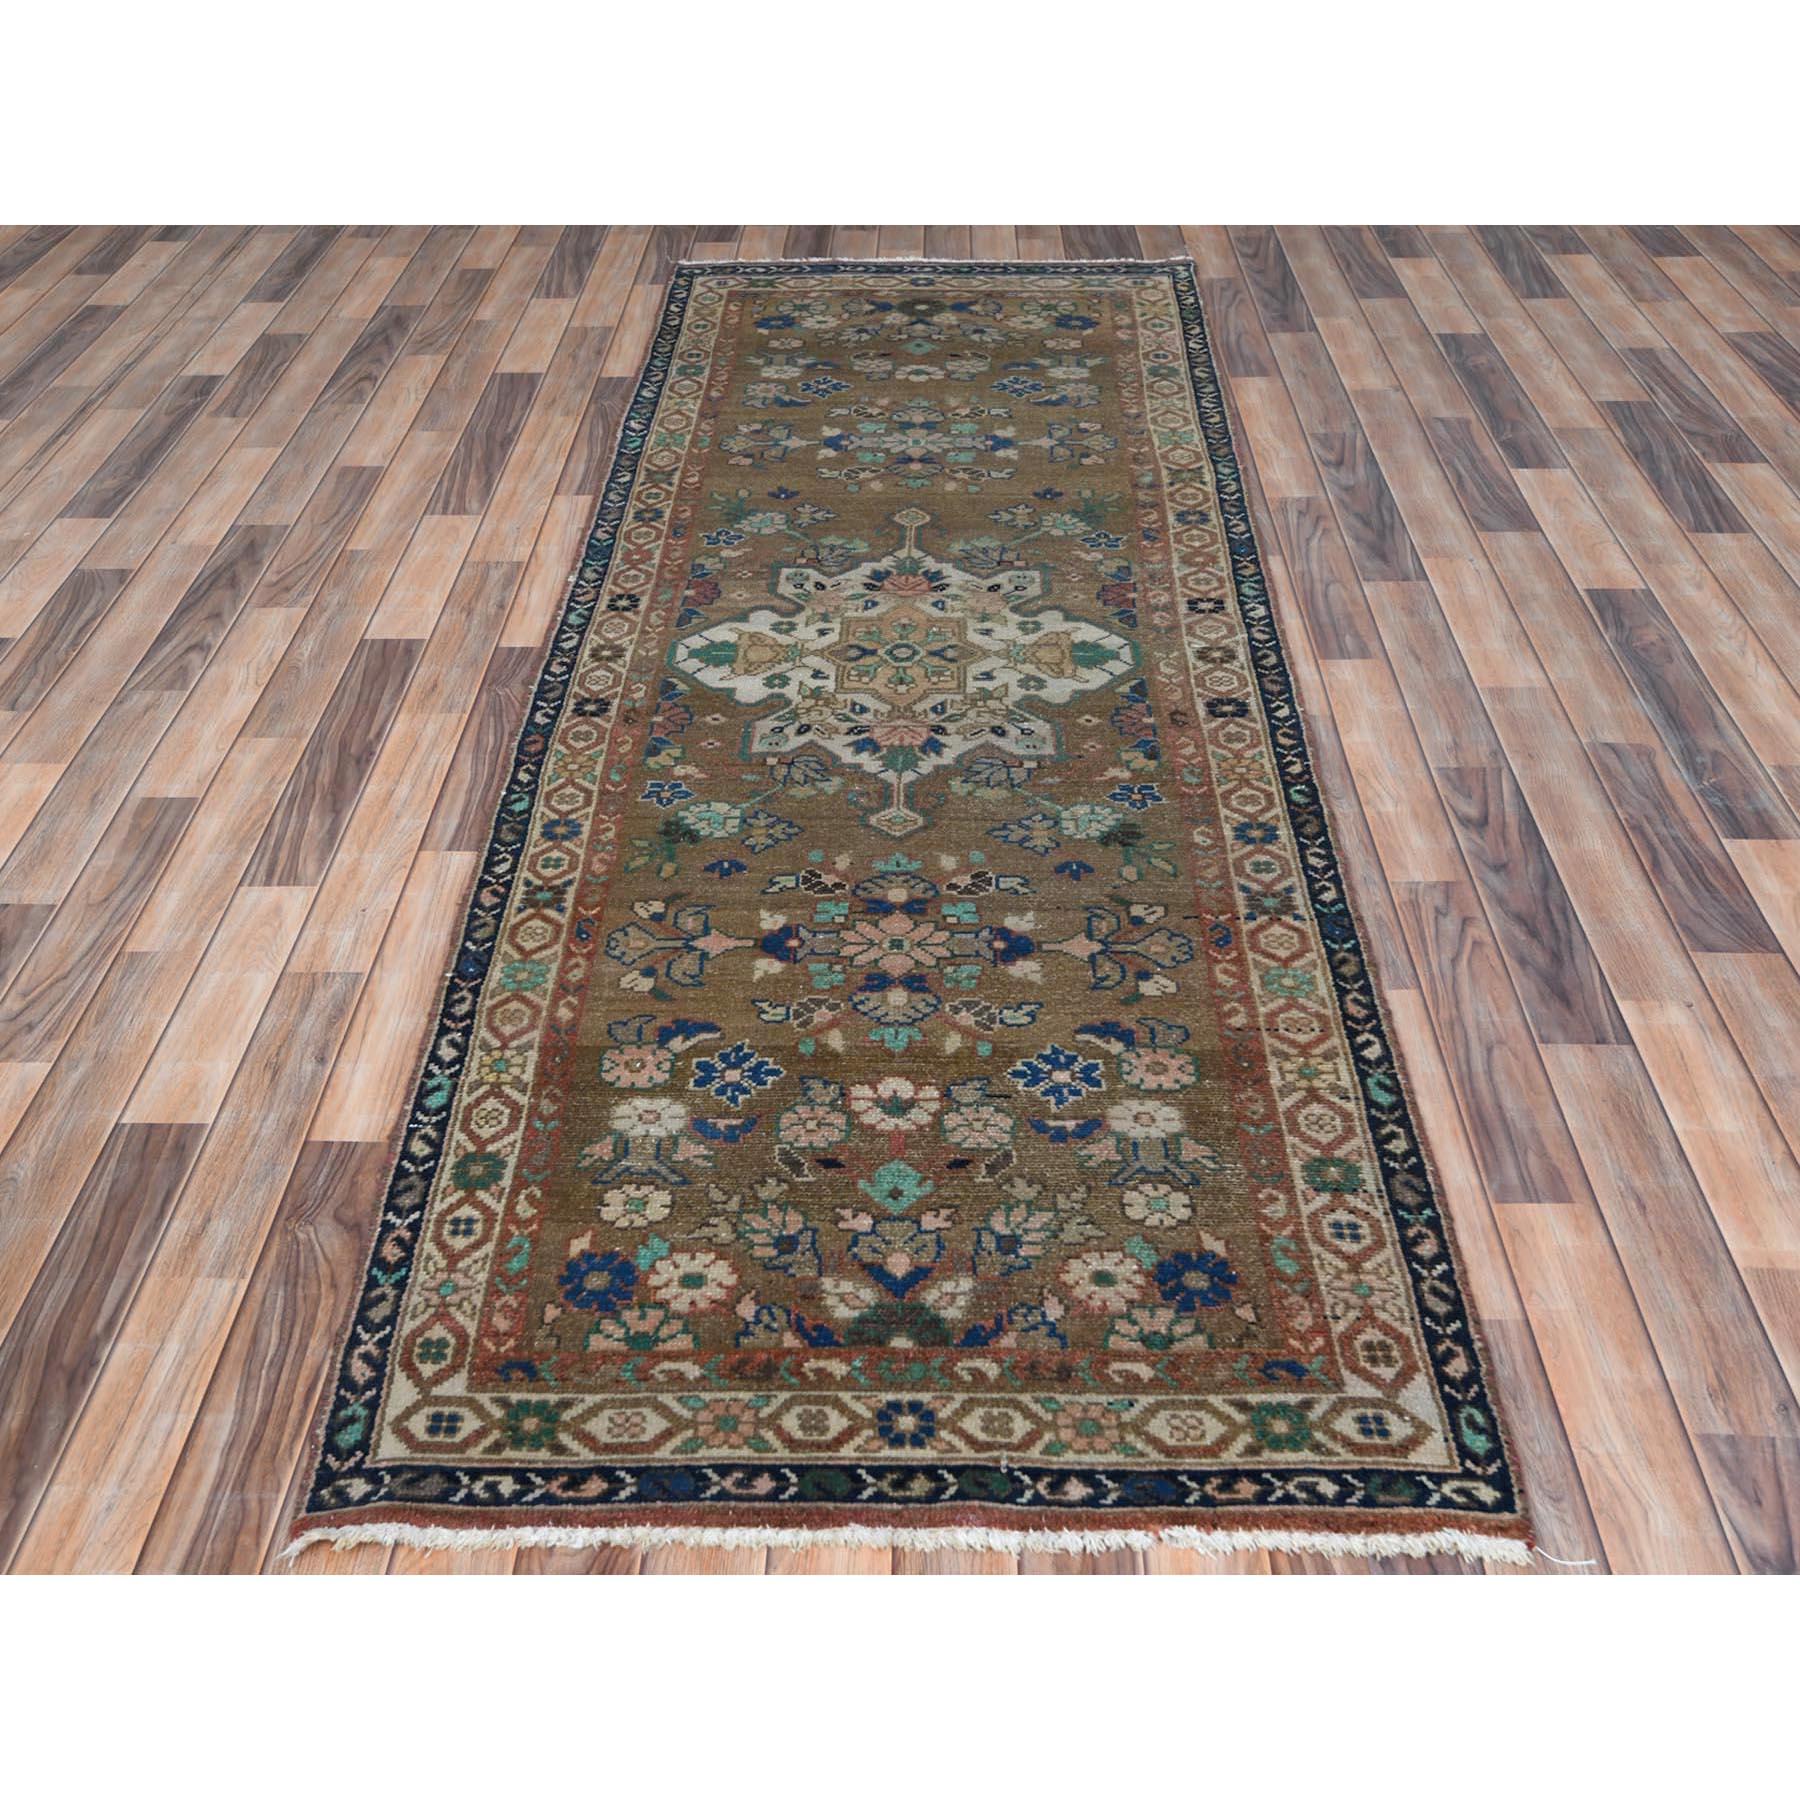 This fabulous hand-knotted carpet has been created and designed for extra strength and durability. This rug has been handcrafted for weeks in the traditional method that is used to make
Exact rug size in feet and inches : 3'4